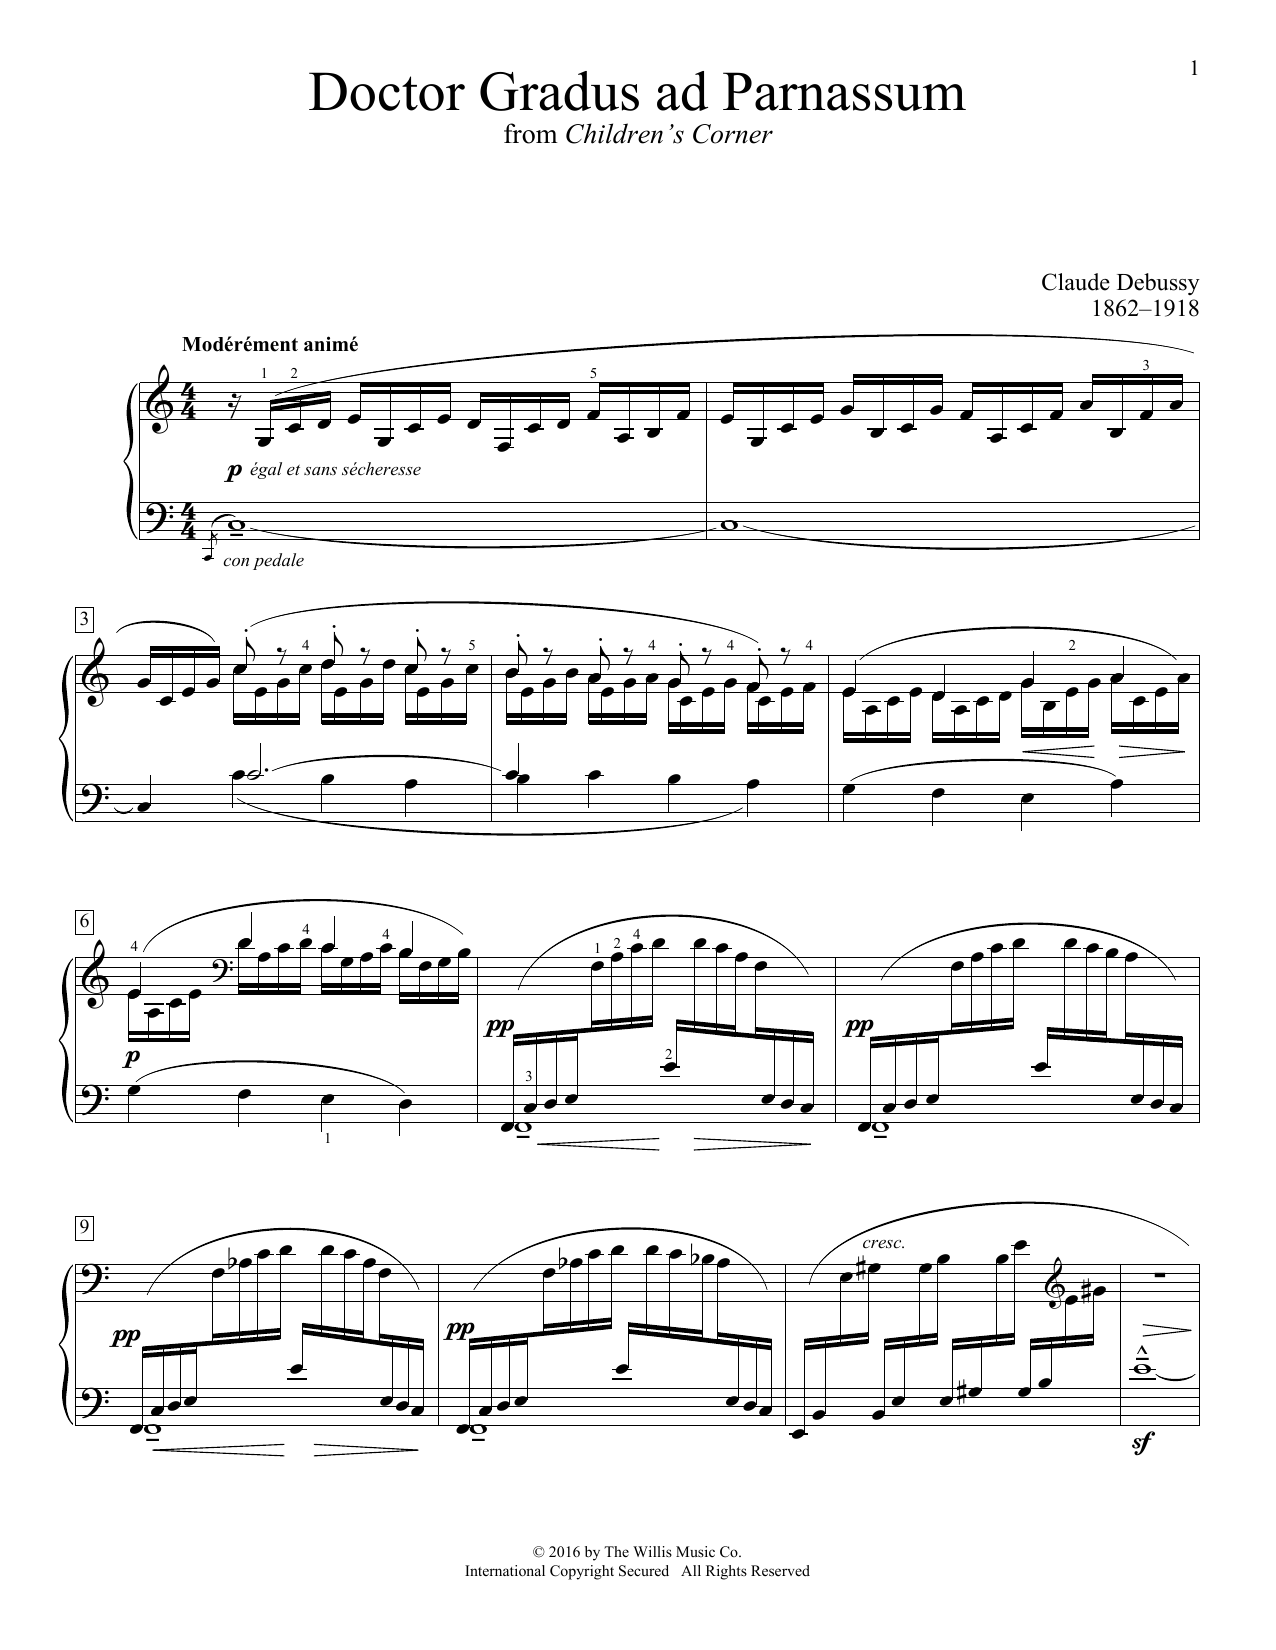 Claude Debussy Doctor Gradus ad Parnassum sheet music notes and chords. Download Printable PDF.